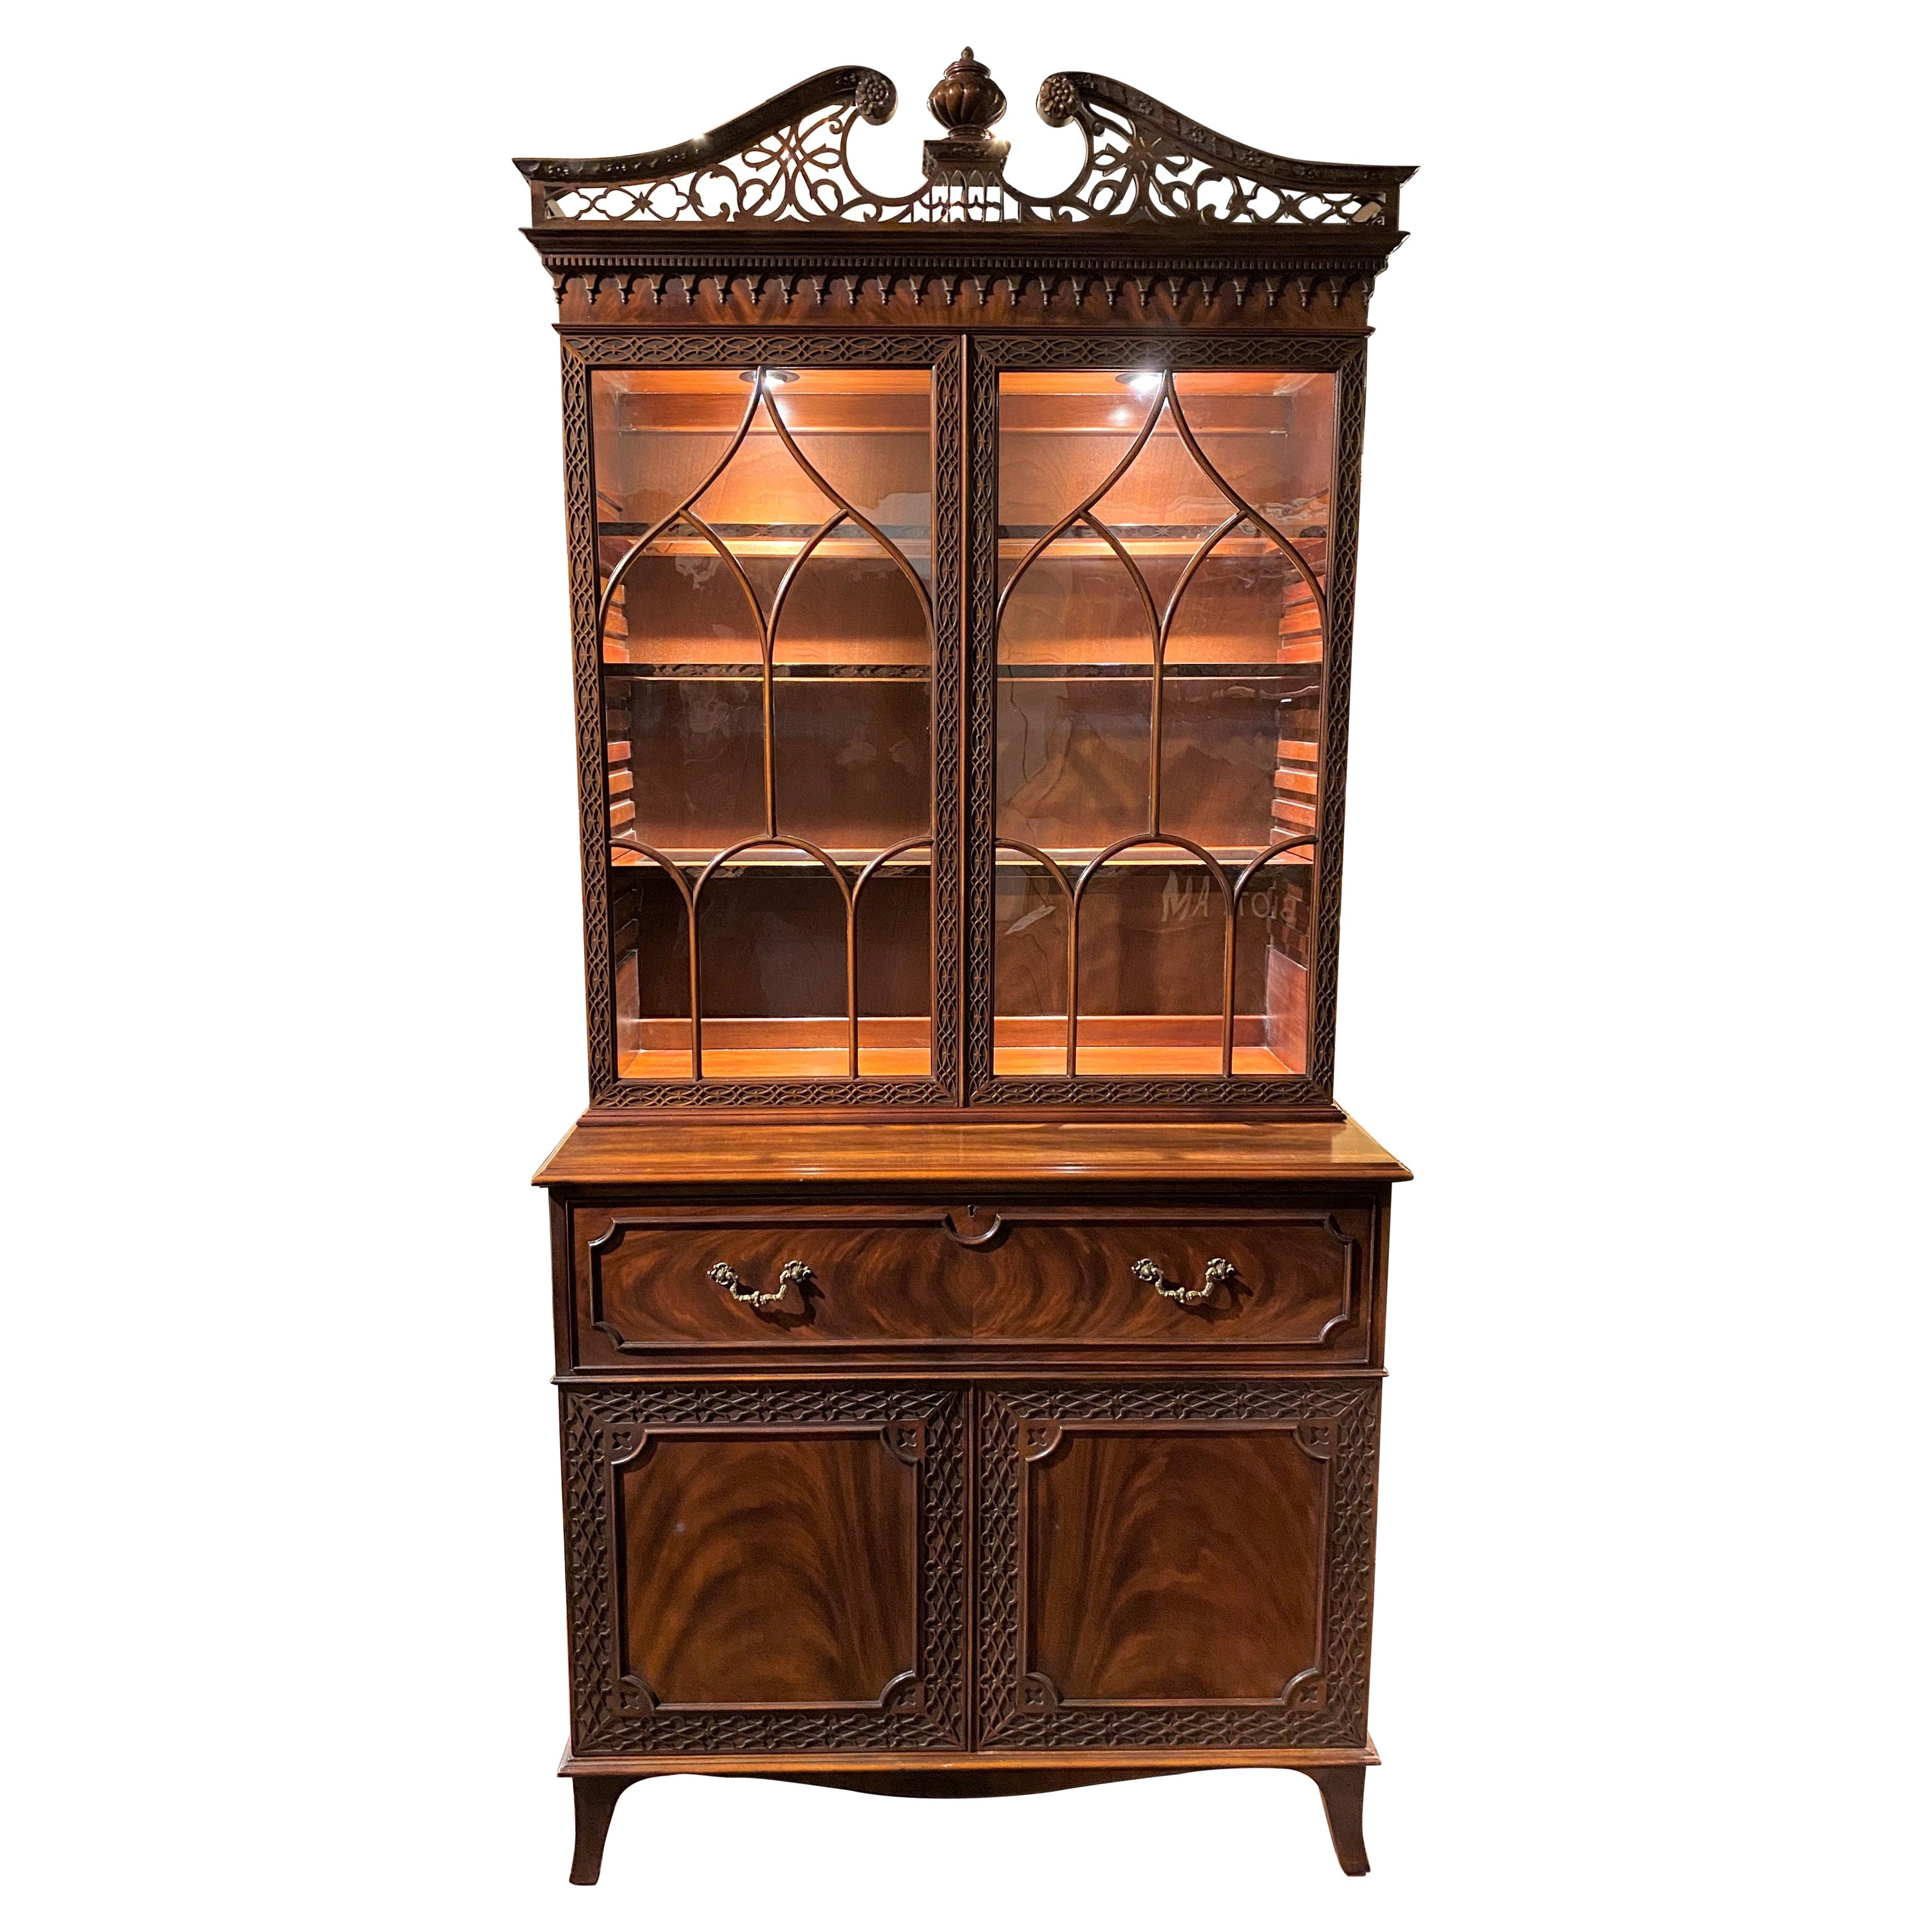 Widdicomb Chinese Chippendale Style Mahogany Display Cabinet with Butler’s Desk